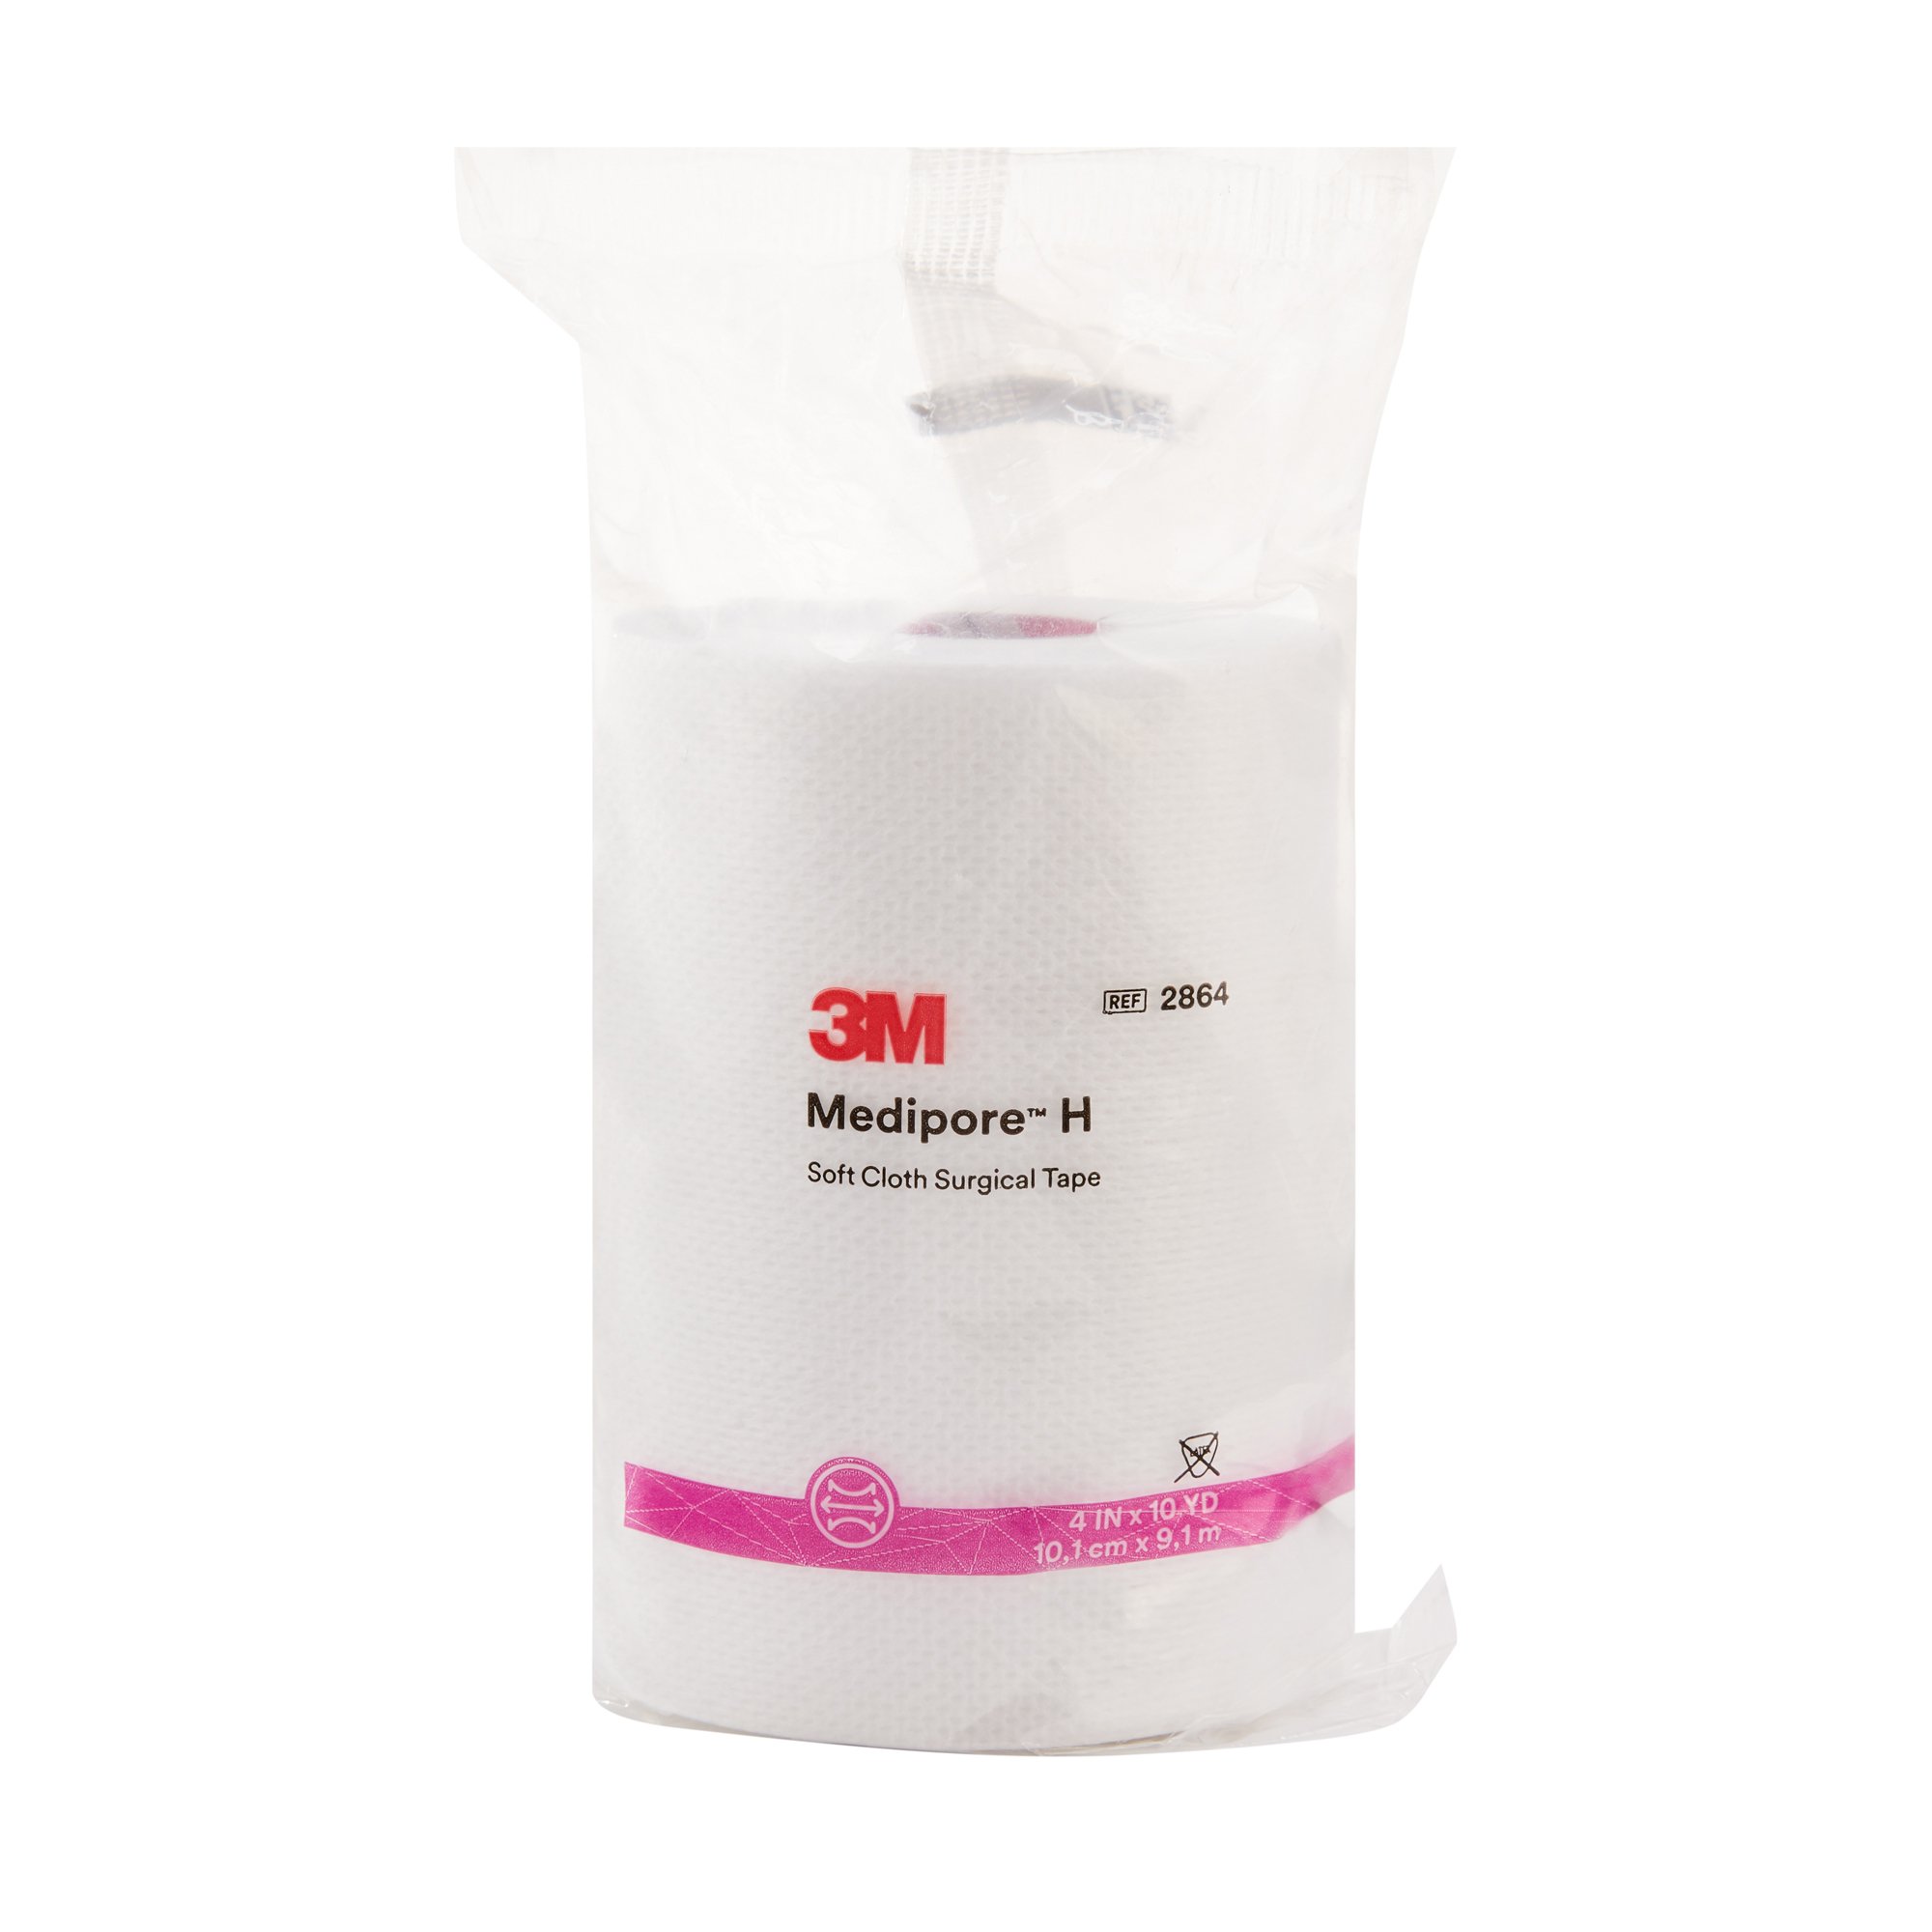 3M™ Medipore™ H Soft Cloth Surgical Tape